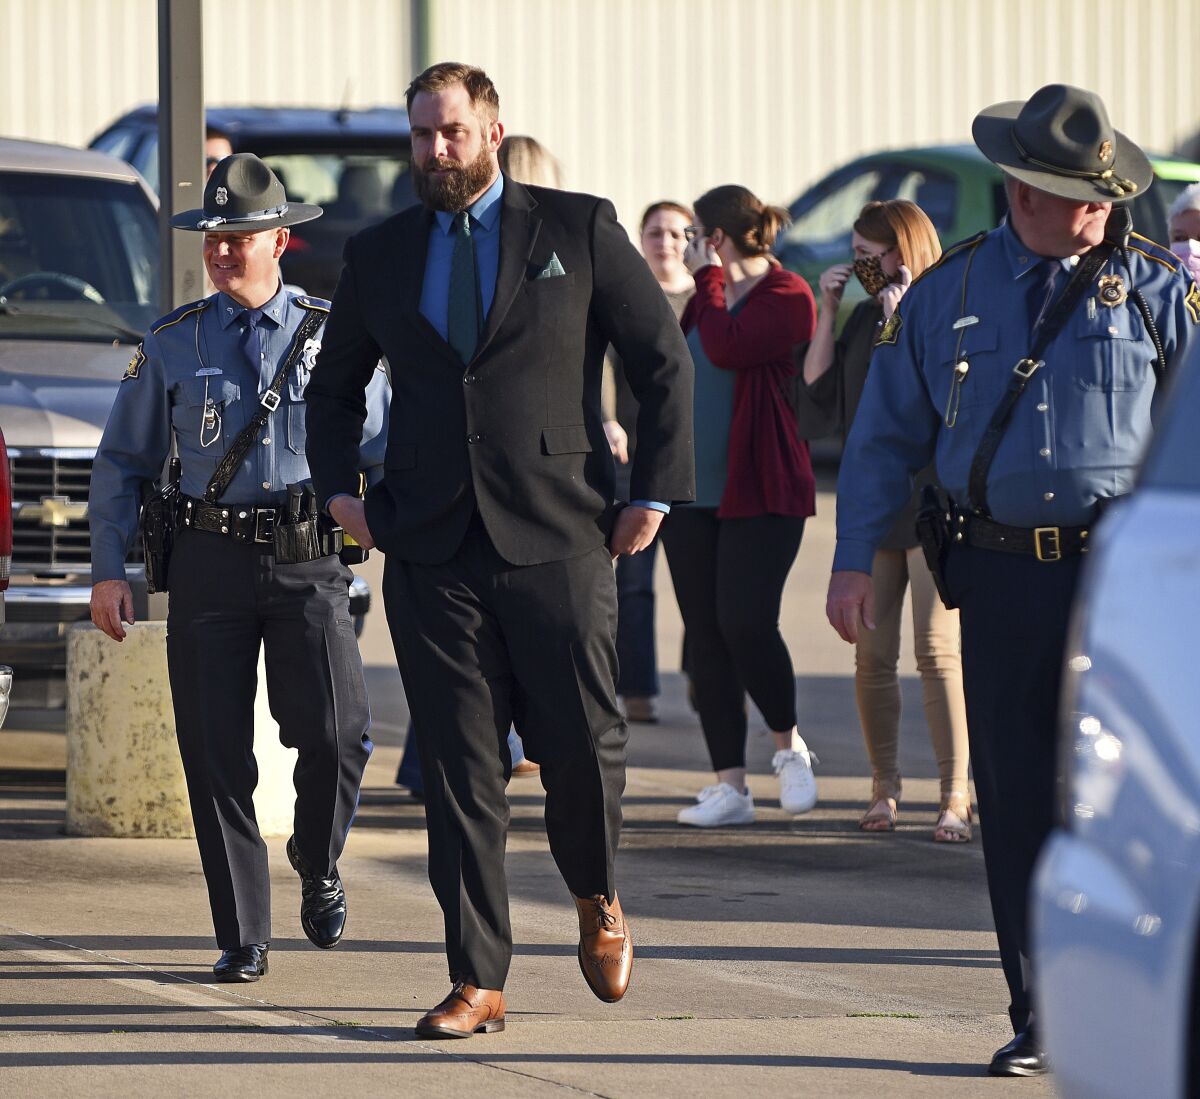 Arkansas State Troopers escort former Lonoke County sheriff's deputy Michael Davis into the Cabot Readiness Center on Thursday, March 17, 2022, for the third day of Davis's manslaughter trial in Cabot, Ark. Jurors began deliberating Thursday in the manslaughter trial of the former Arkansas deputy, who fatally shot Hunter Brittain, an unarmed 17-year-old, during a traffic stop. (Staci Vandagriff/The Arkansas Democrat-Gazette via AP)